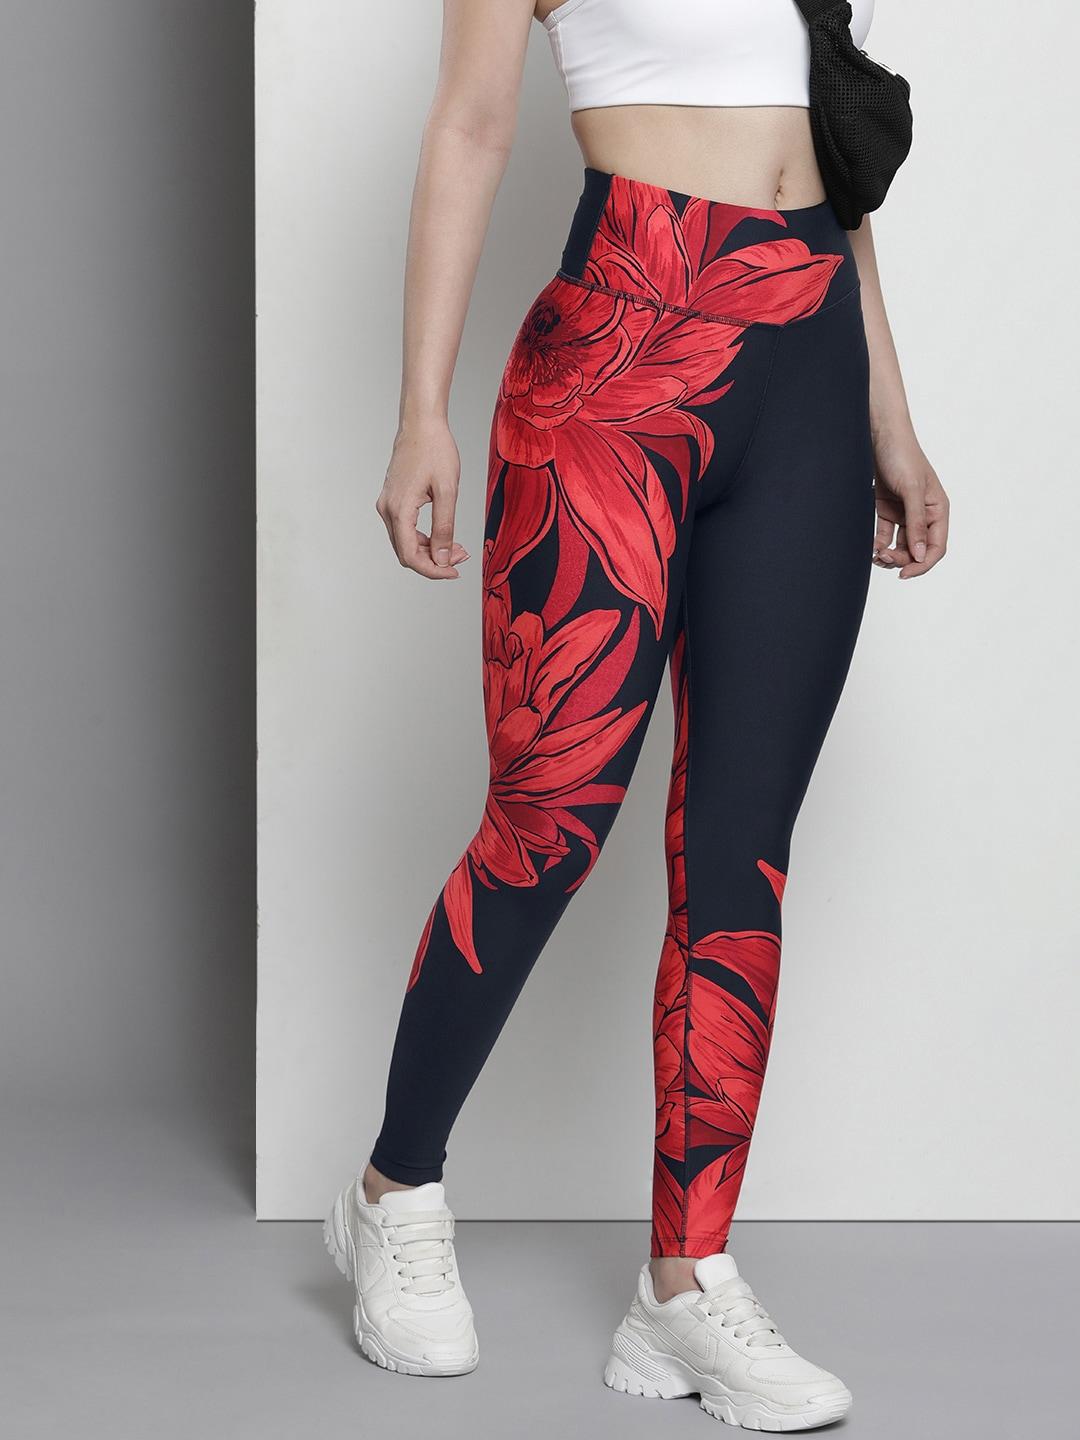 tommy-hilfiger-women-red-and-black-floral-printed-aop-tights